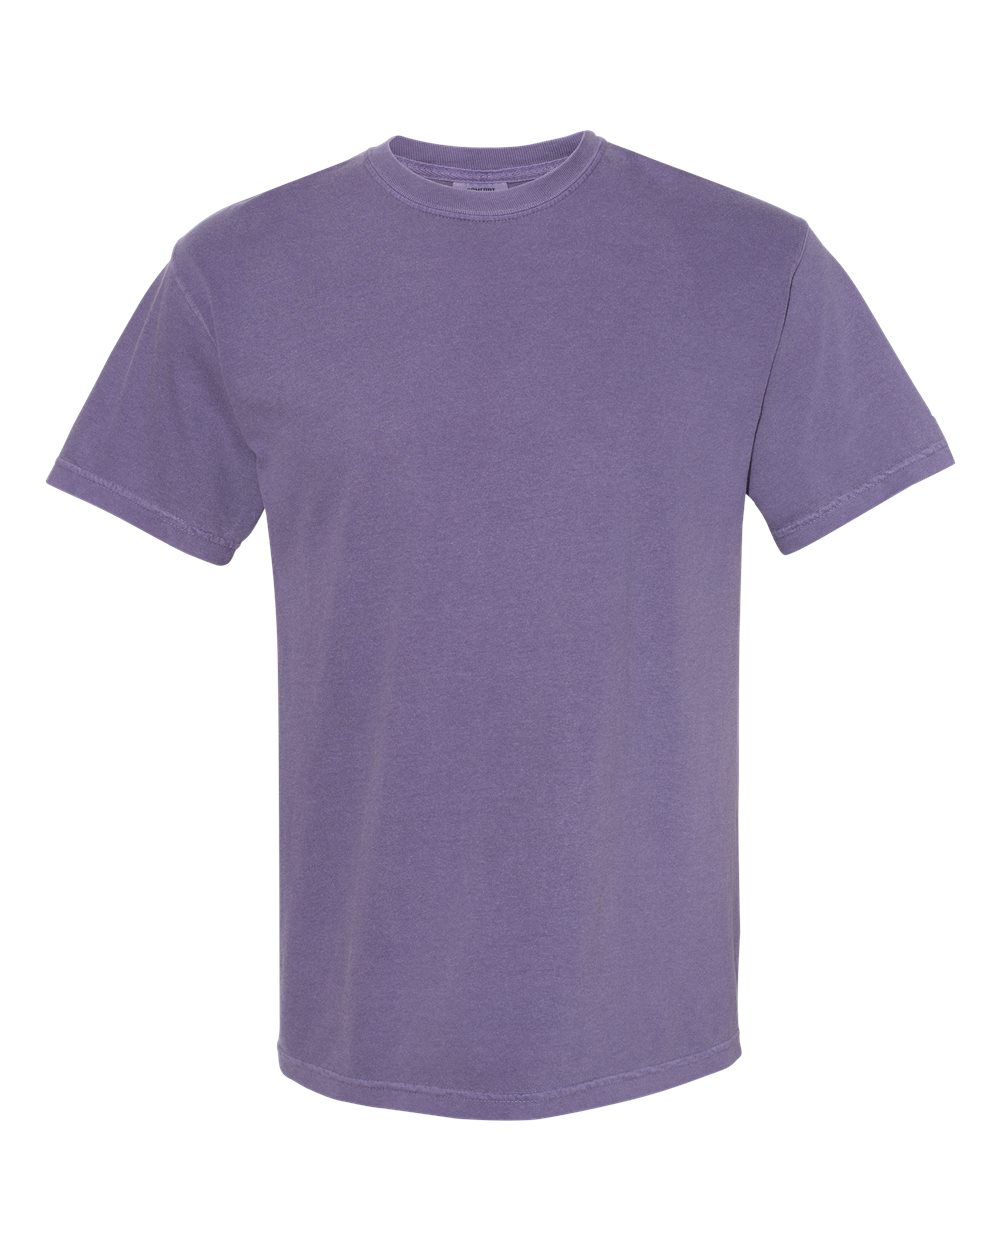 Comfort Colors Garment-Dyed Tee (1717) in Grape